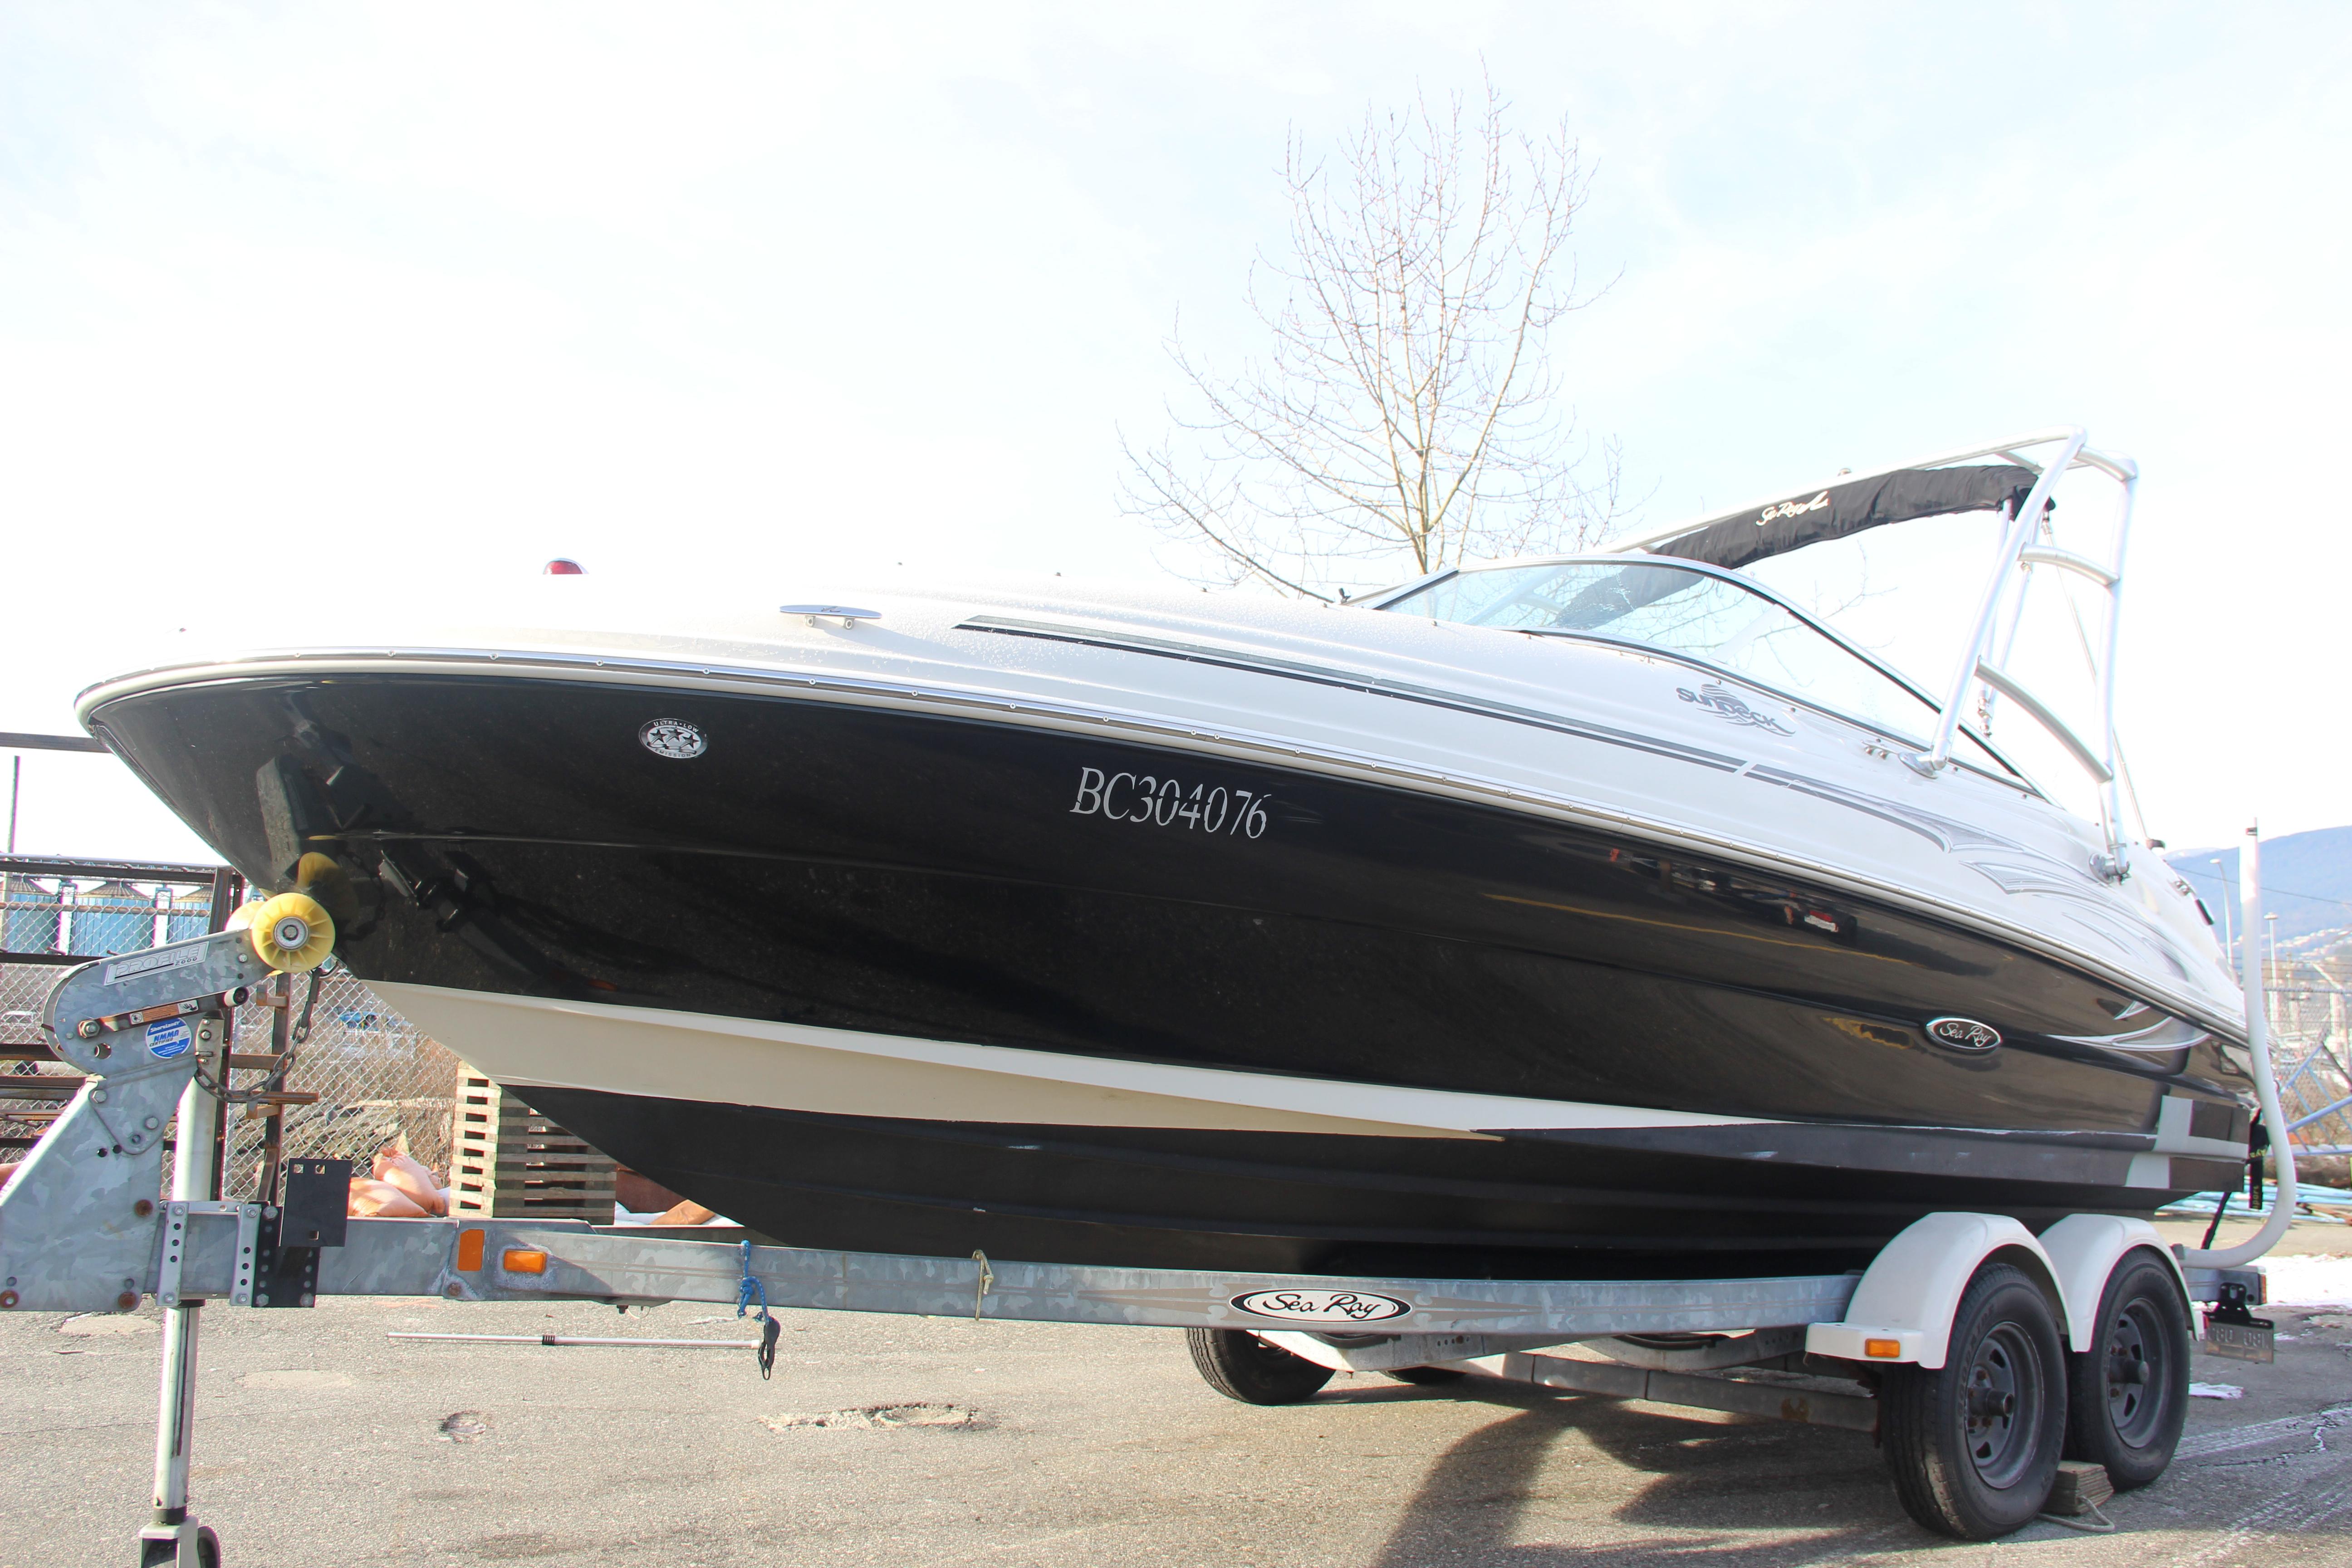 2006 Sea Ray 200 Sundeck Runabout for sale - YachtWorld